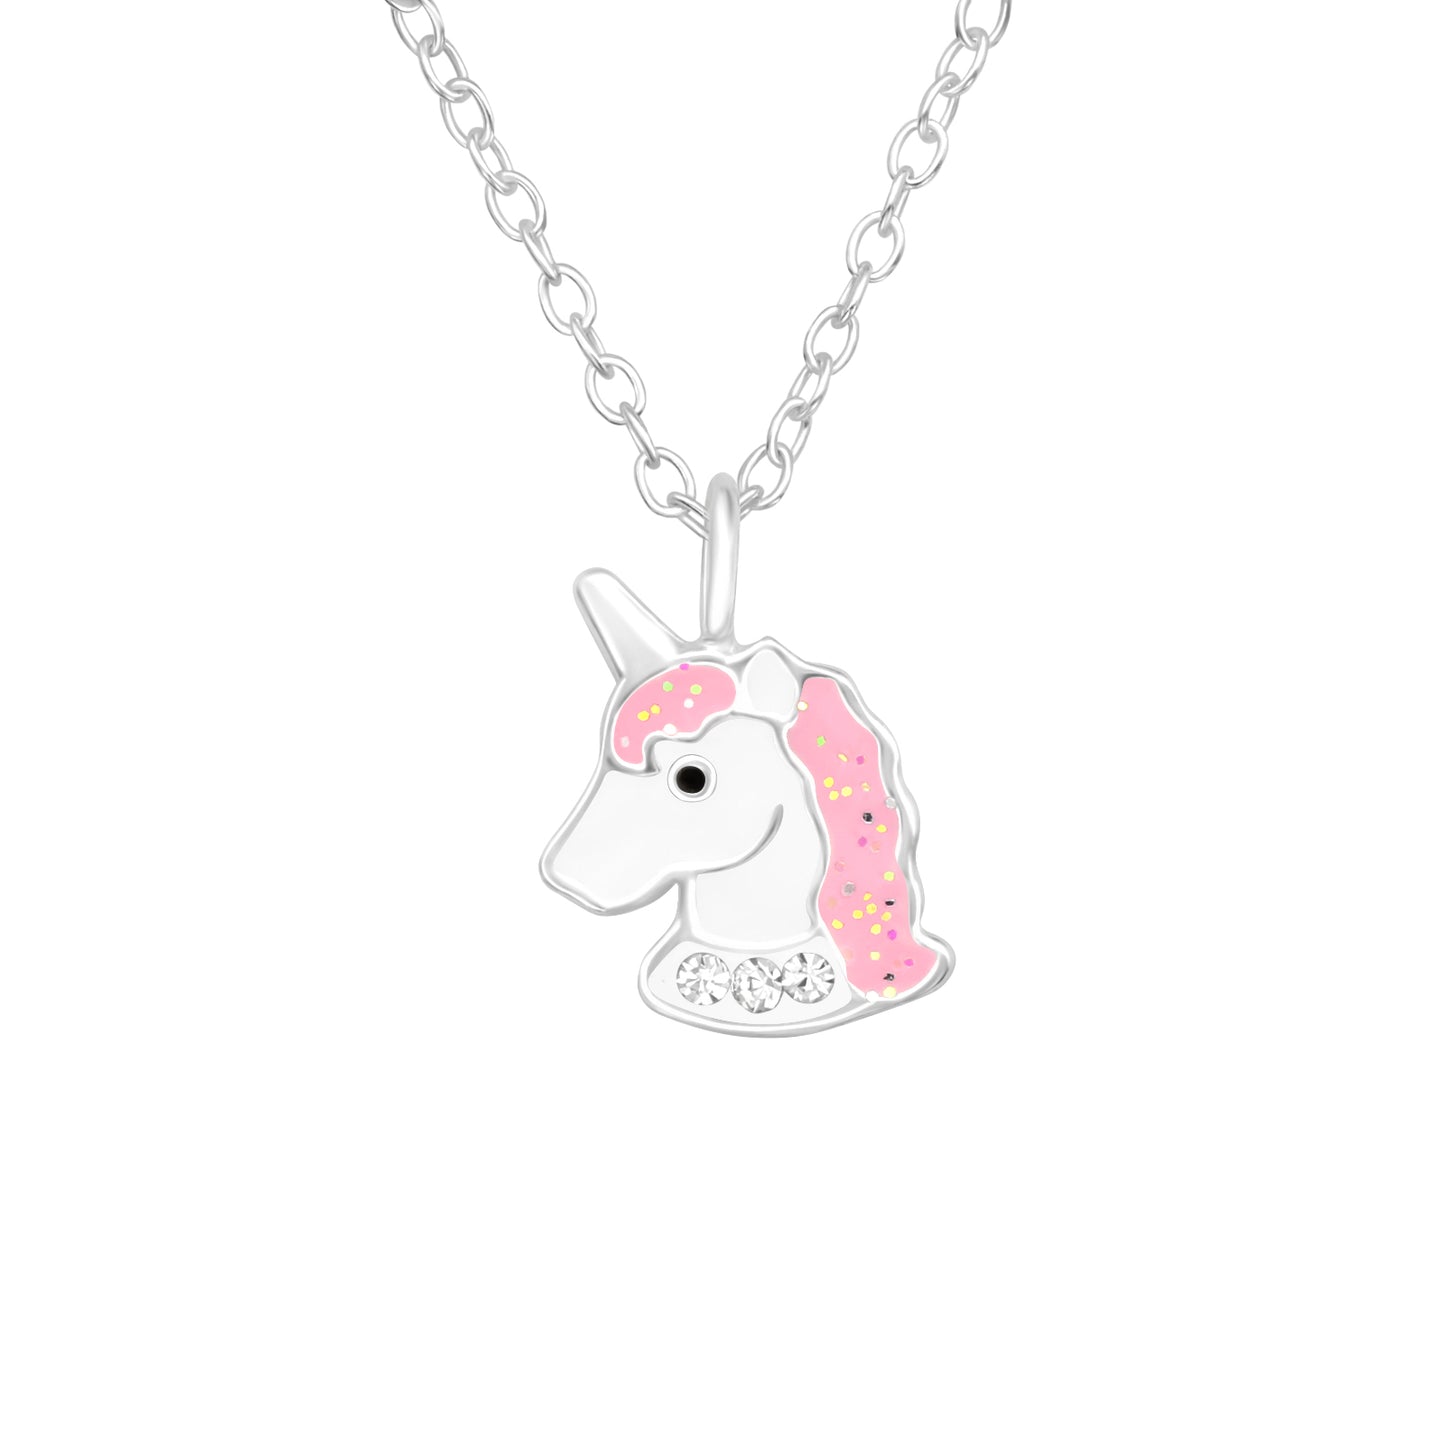 Unicorn Necklace Australia - 925 Sterling Silver in Pink